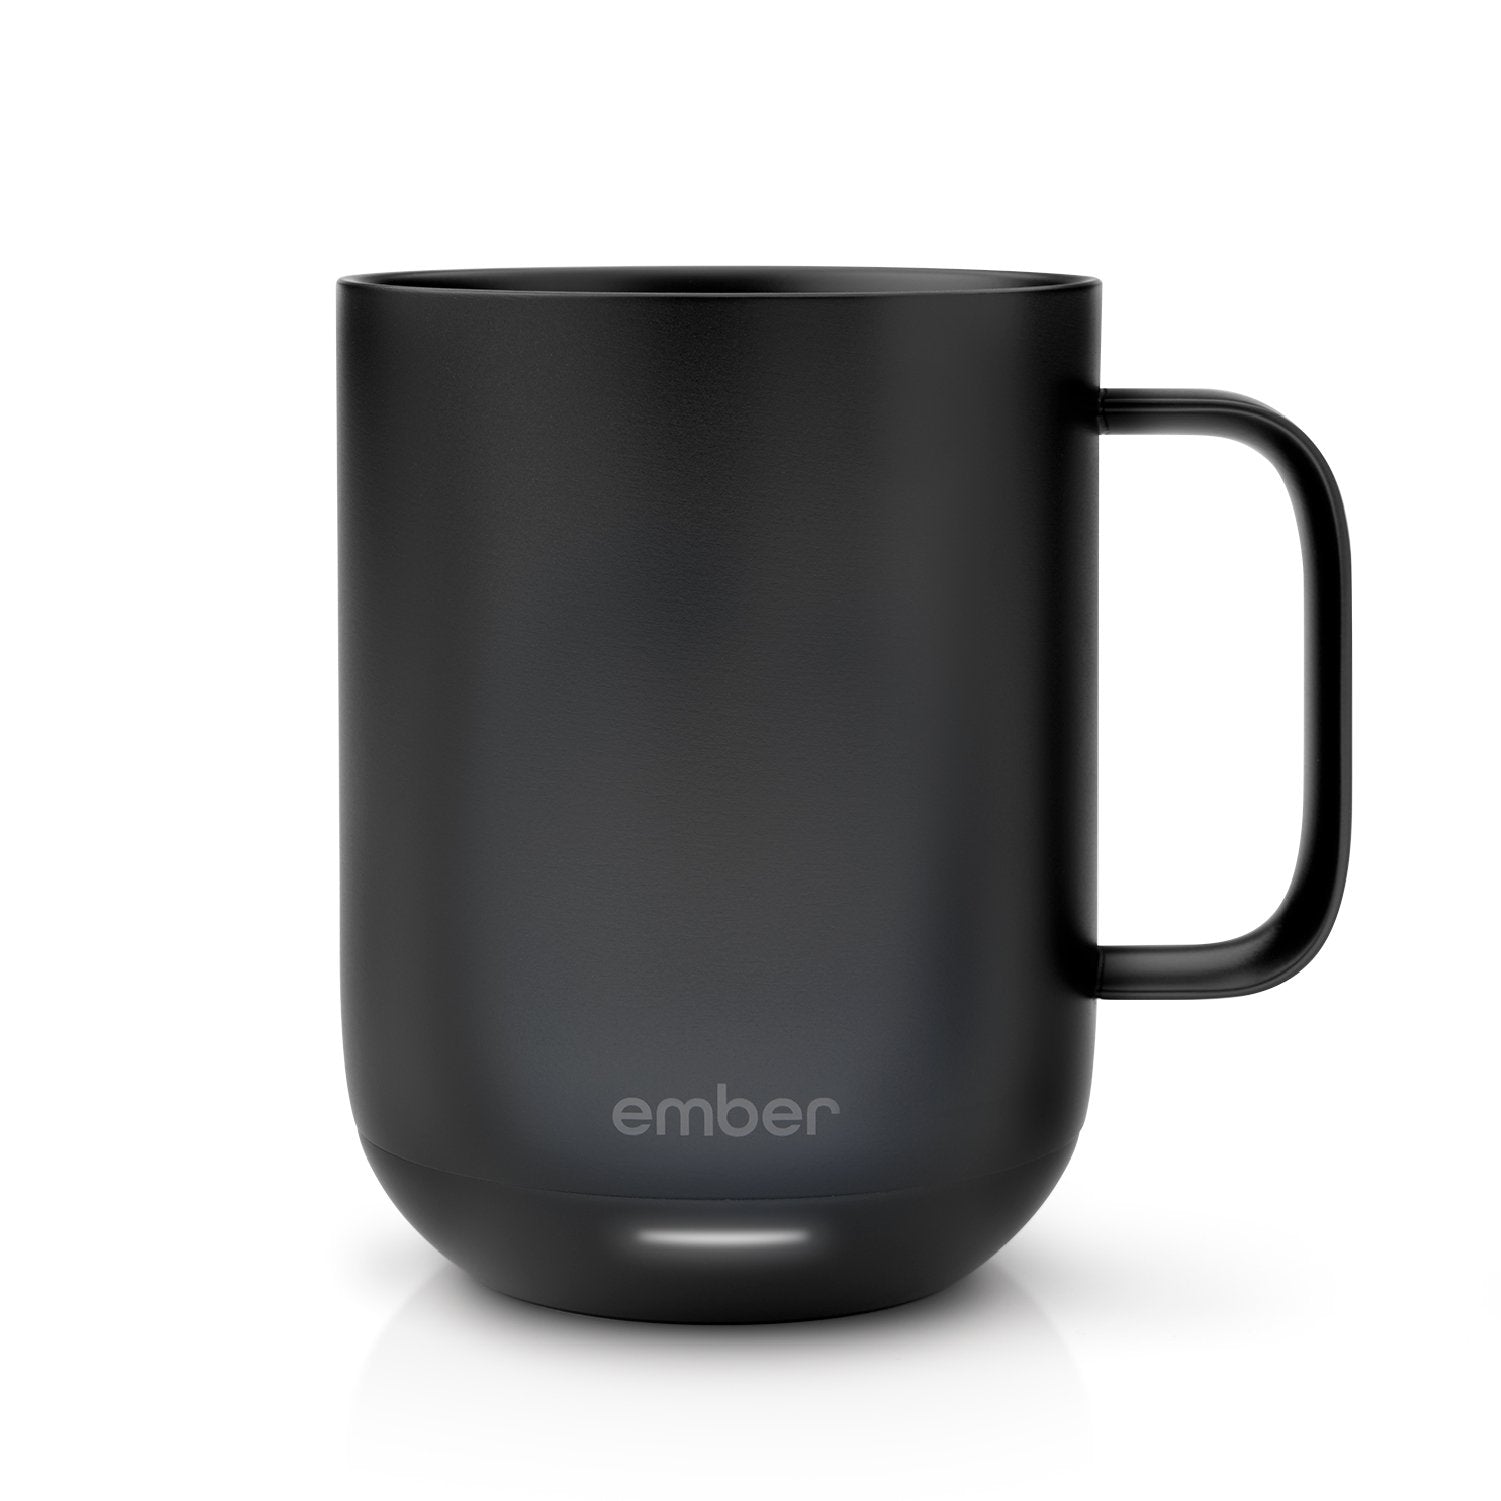  Ember Temperature Control Smart Mug 2, 10 Oz, App-Controlled  Heated Coffee Mug with 80 Min Battery Life and Improved Design, White